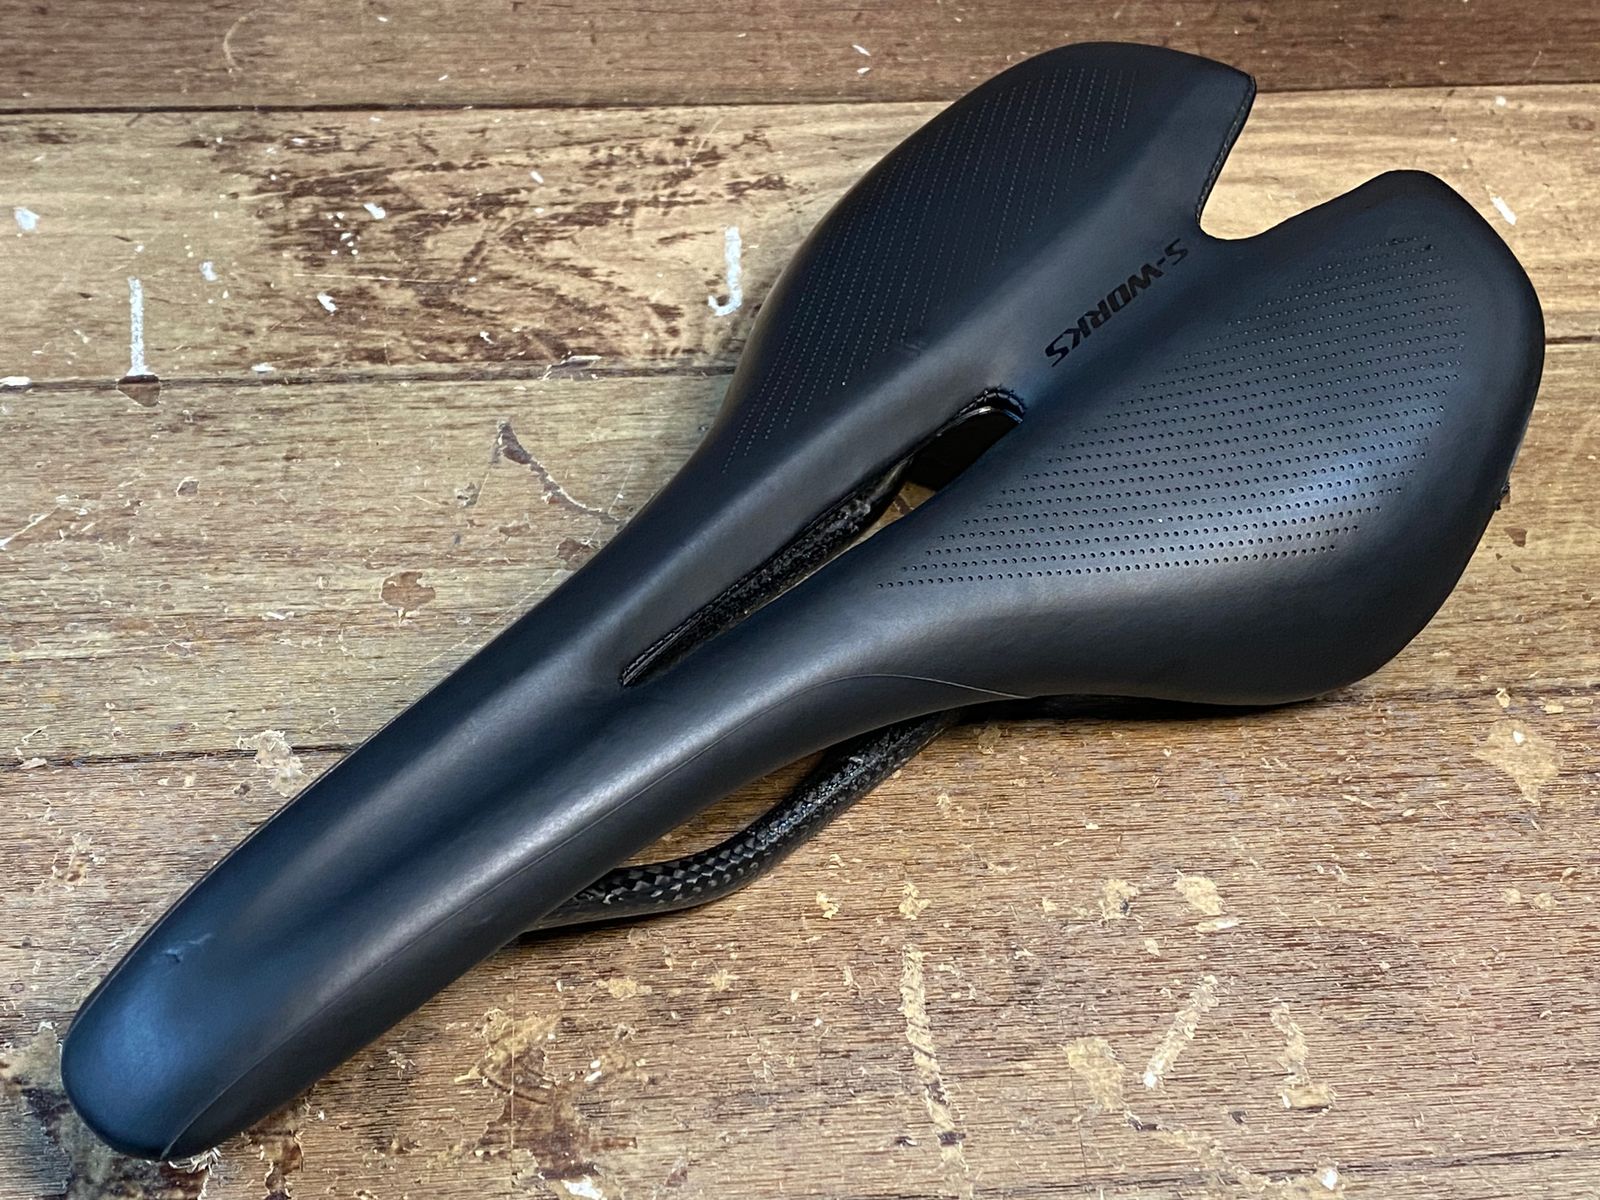 HB655 スペシャライズド SPECIALIZED S-WORKS TOUPE カーボンレール サドル 143mm - メルカリ